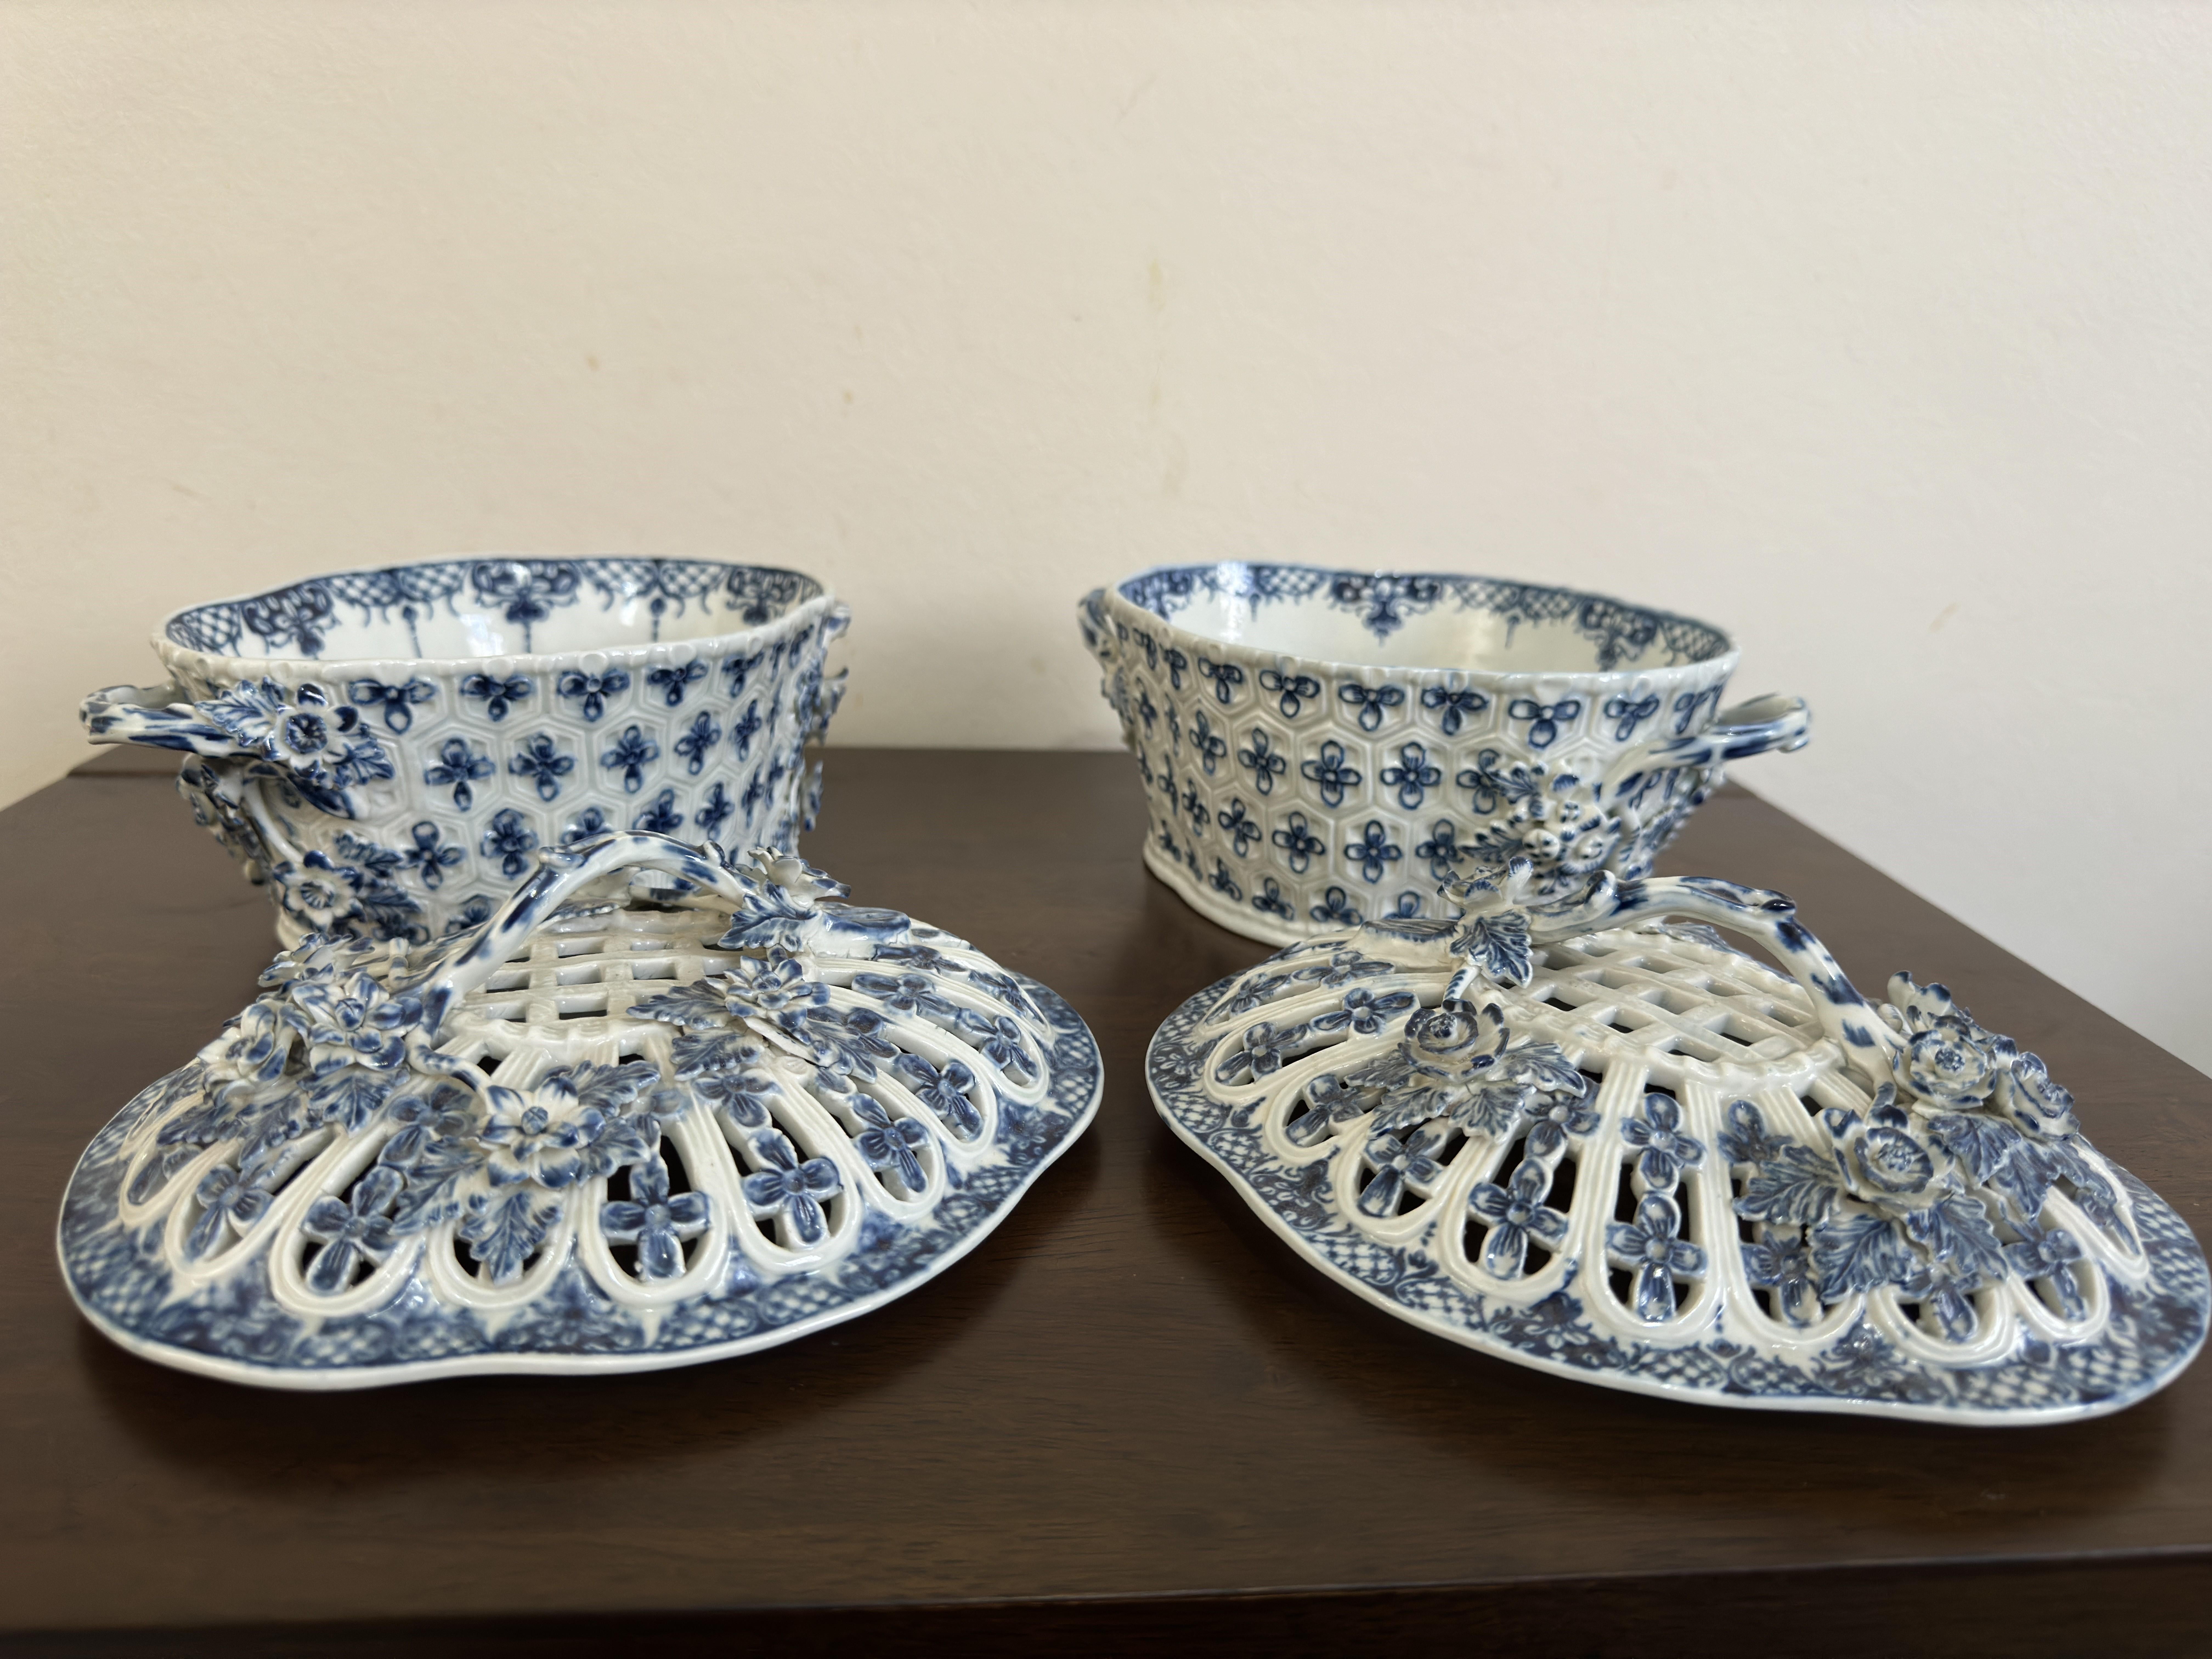 Pair Worcester First Period / Dr Wall chestnut baskets and lids. circa 1780. Blue underglaze porcelain, the body incised with honeycomb pattern and decorated with fleur de lis, loop handles with flowerheads at the terminus, with conforming openwork